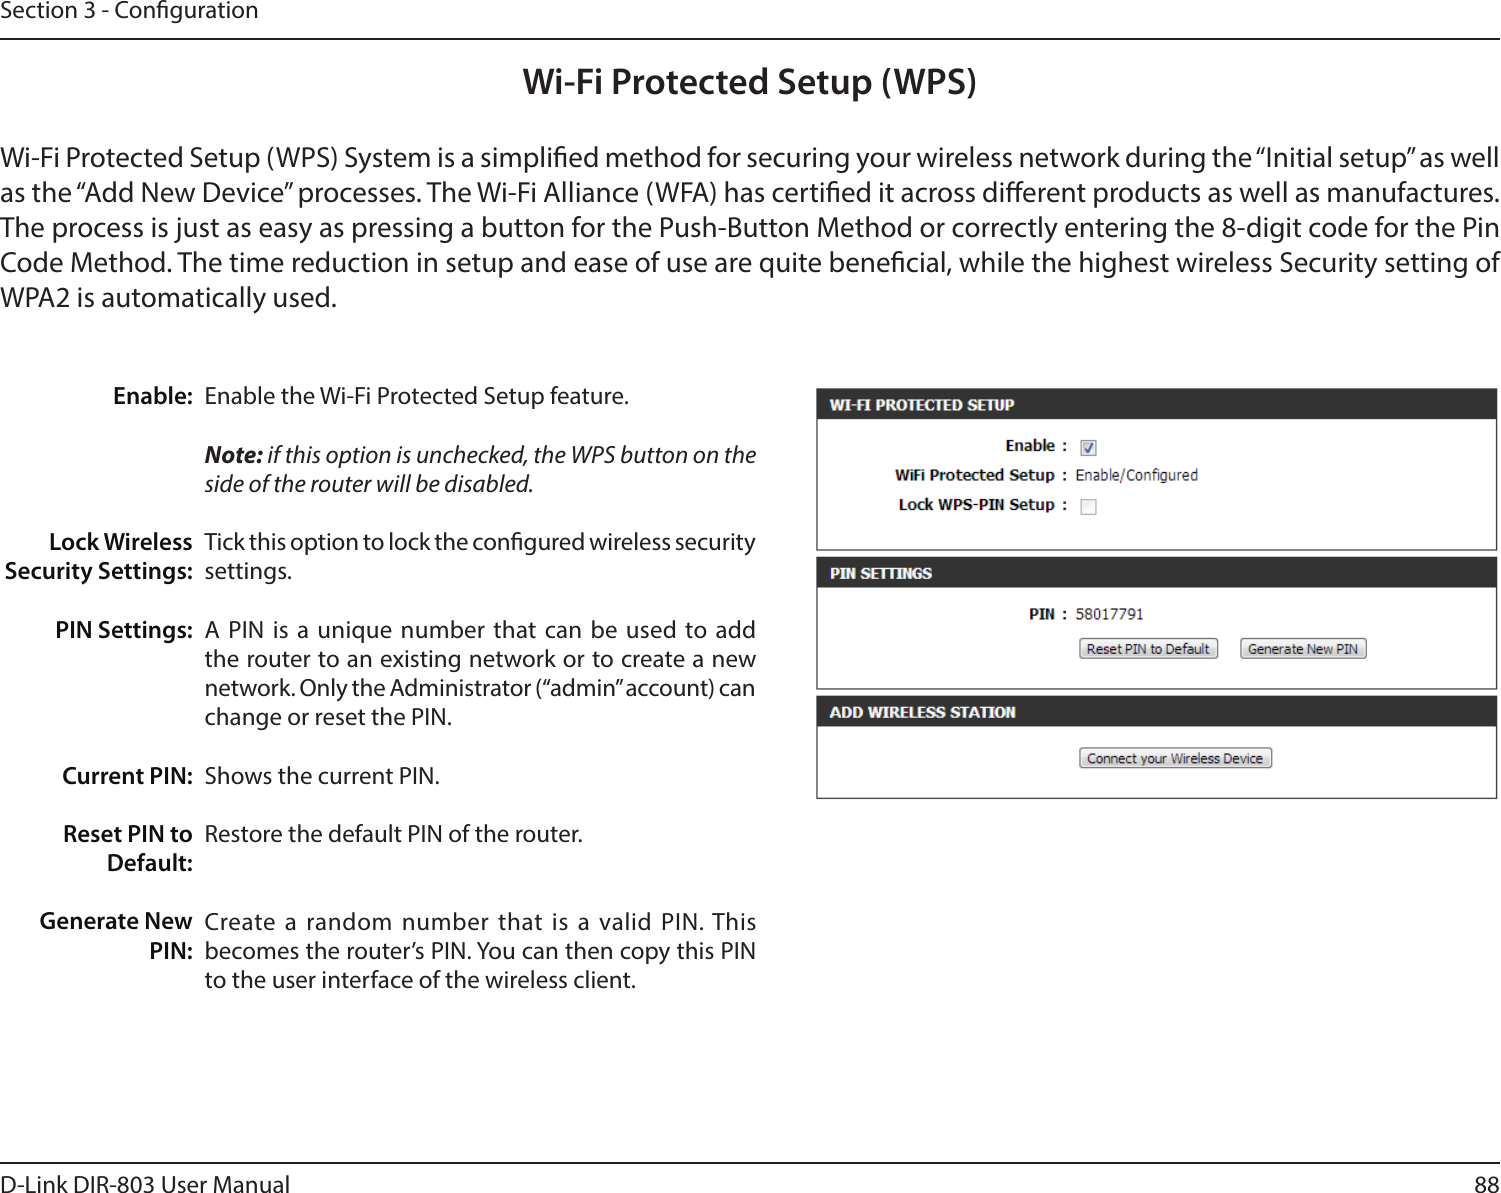 88D-Link DIR-803 User ManualSection 3 - CongurationWi-Fi Protected Setup (WPS)Enable the Wi-Fi Protected Setup feature. Note: if this option is unchecked, the WPS button on the side of the router will be disabled.Tick this option to lock the congured wireless security settings.A PIN is a unique number that can be used to add the router to an existing network or to create a new network. Only the Administrator (“admin” account) can change or reset the PIN. Shows the current PIN. Restore the default PIN of the router. Create a random number that is a valid PIN. This becomes the router’s PIN. You can then copy this PIN to the user interface of the wireless client.Enable:Lock Wireless Security Settings:PIN Settings:Current PIN:Reset PIN to Default:Generate New PIN:Wi-Fi Protected Setup (WPS) System is a simplied method for securing your wireless network during the “Initial setup” as well as the “Add New Device” processes. The Wi-Fi Alliance (WFA) has certied it across dierent products as well as manufactures. The process is just as easy as pressing a button for the Push-Button Method or correctly entering the 8-digit code for the Pin Code Method. The time reduction in setup and ease of use are quite benecial, while the highest wireless Security setting of WPA2 is automatically used.